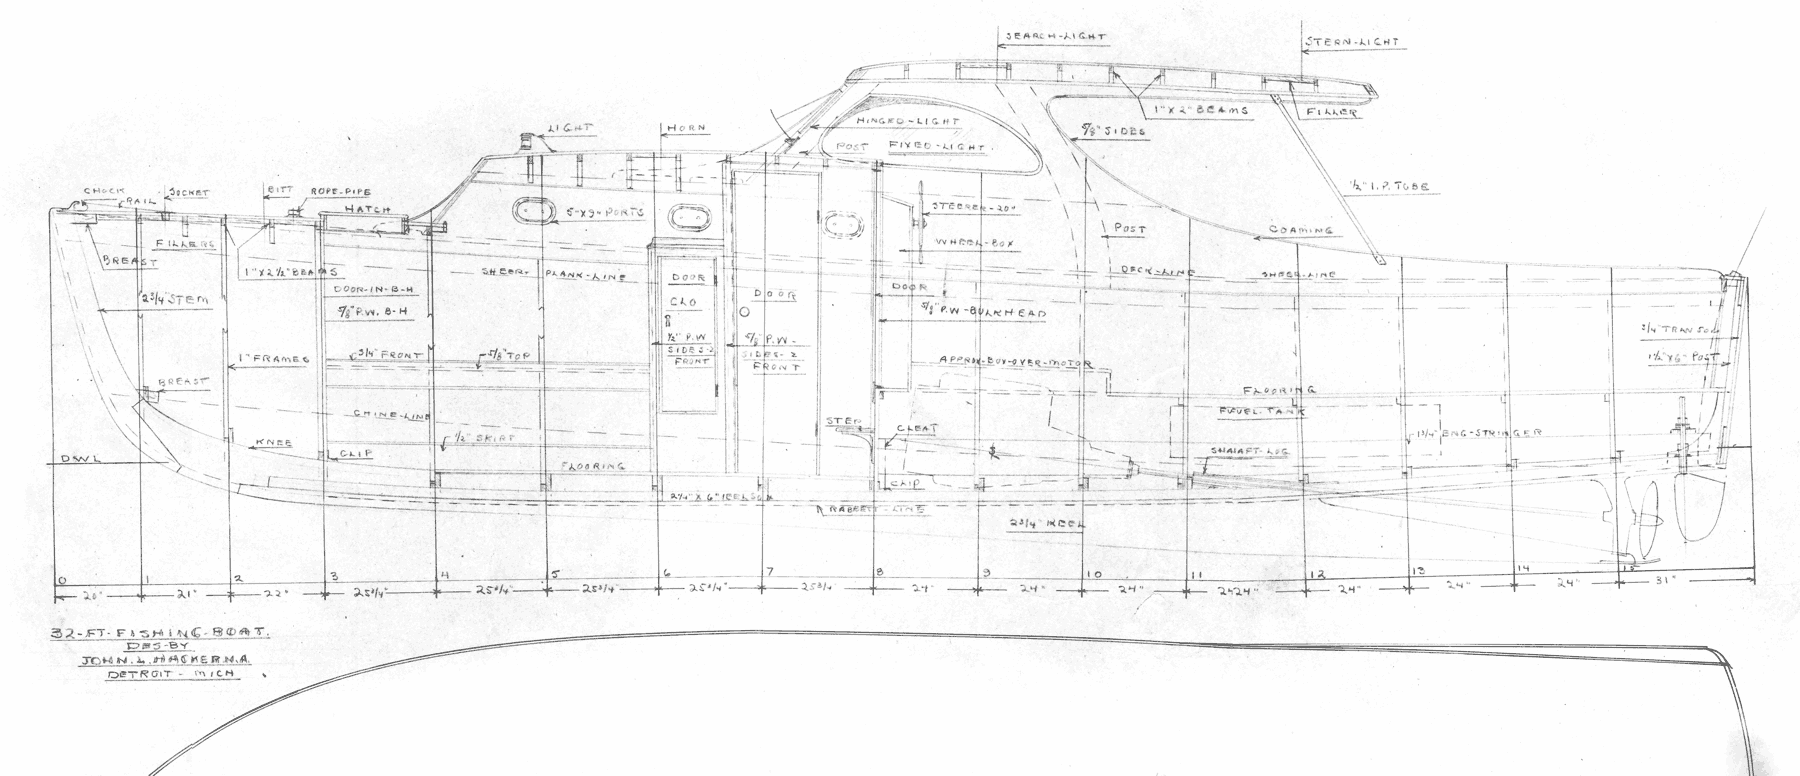 32' Fishing Boat Construction Section designed by John L. Hacker